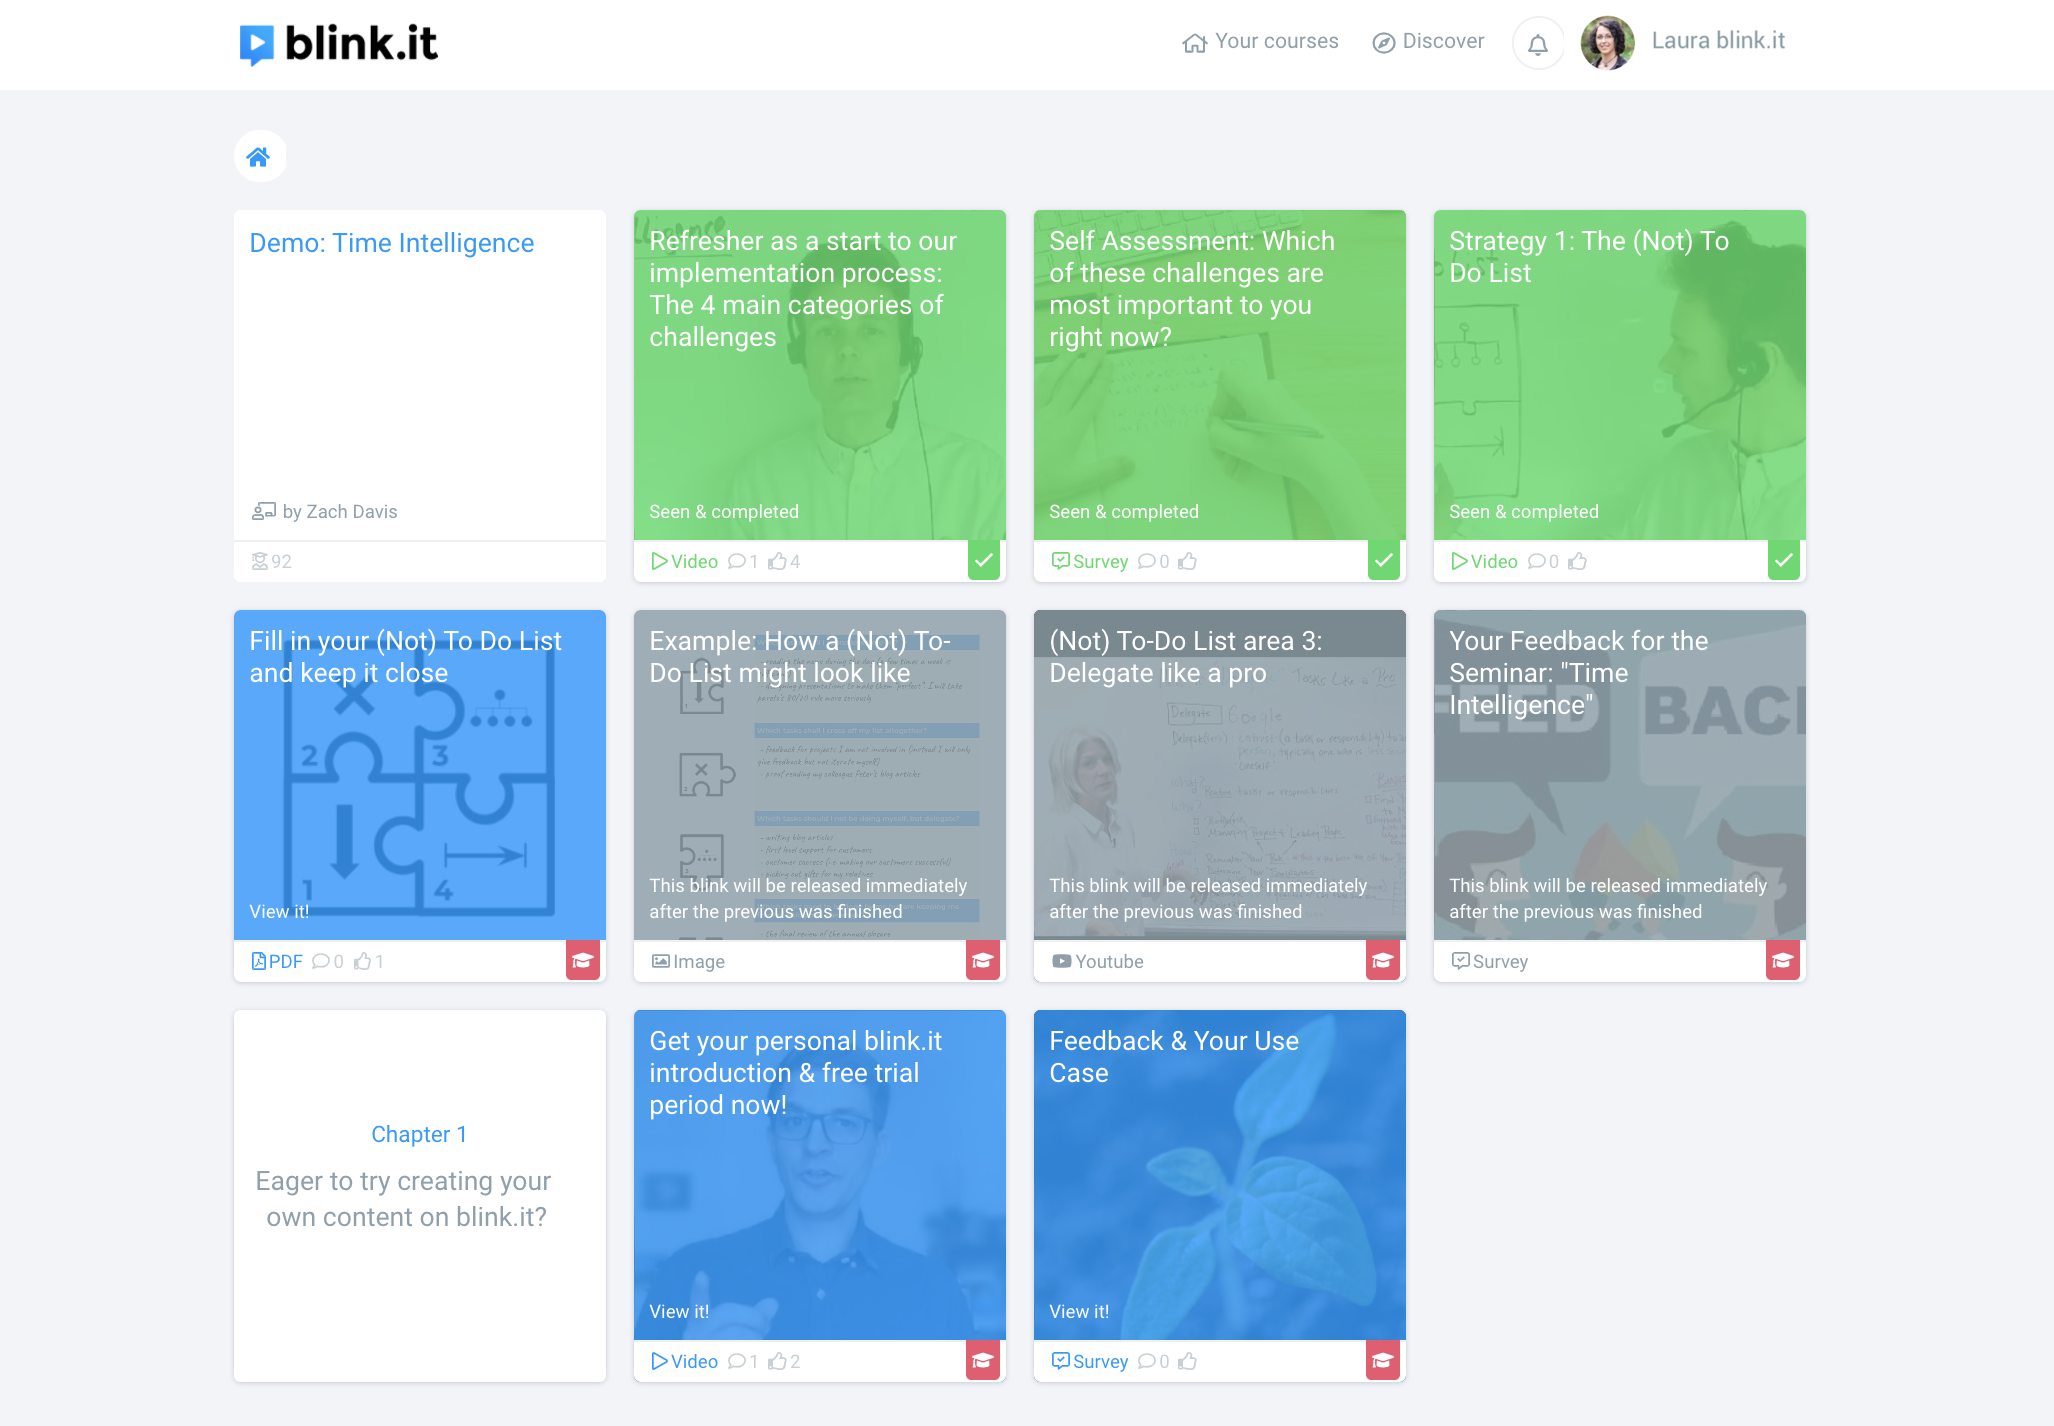 blink.it course overview: Create your own course directly in the learning platform // Source: blink.it